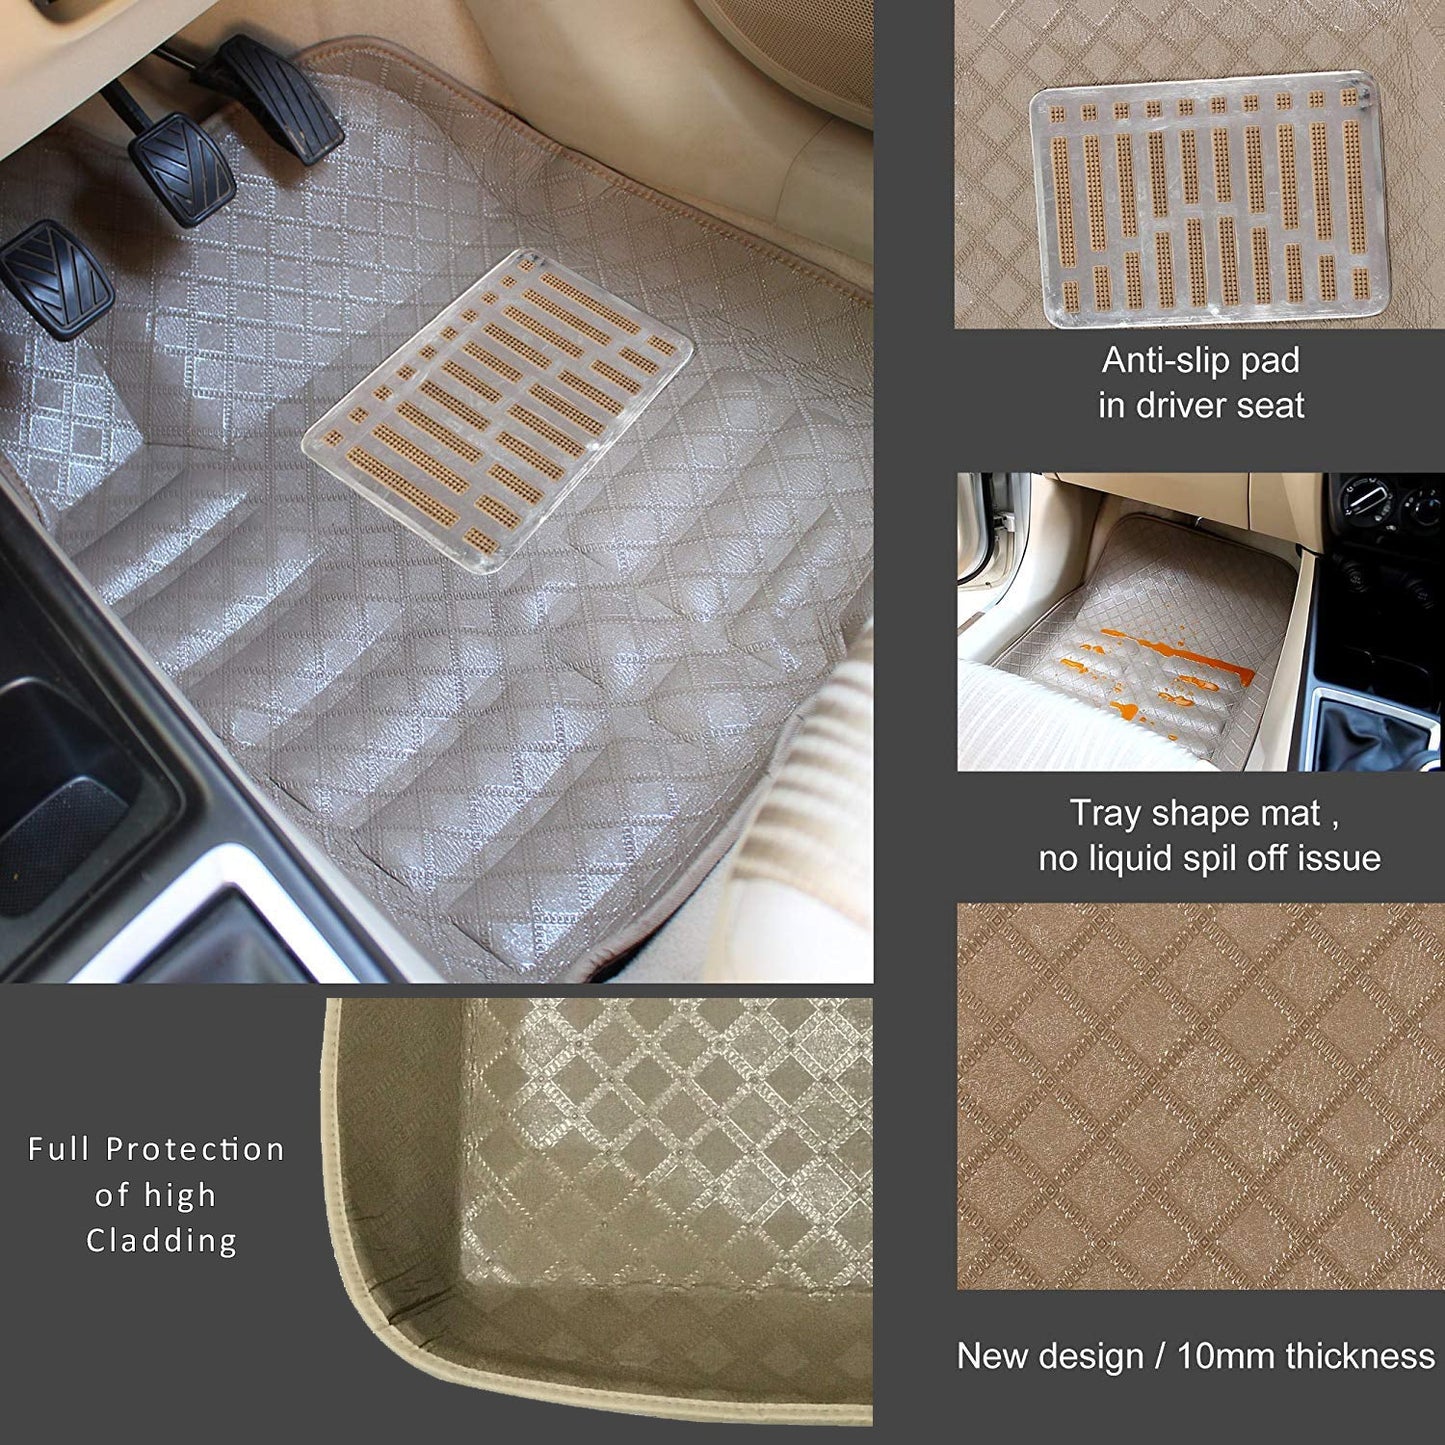 Oshotto 4D Artificial Leather Car Floor Mats For Mahindra XUV 500 - Set of 4 (Complete Mat with Third Row) - Beige